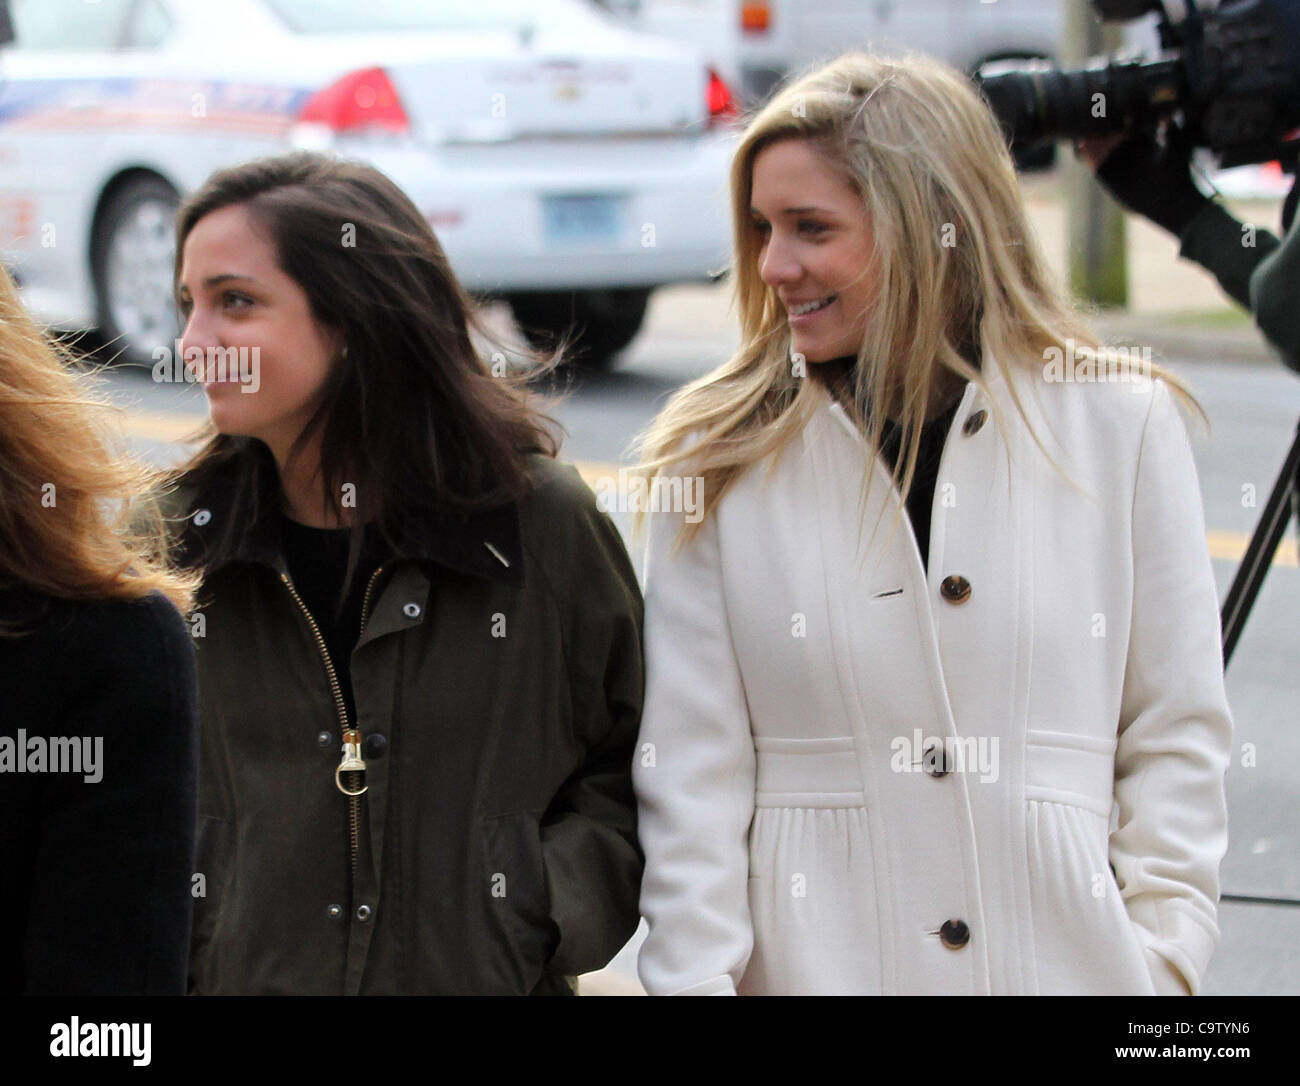 Feb. 18, 2012 - Charlottesville, Virginia, UNITED STATES - CHARLOTTESVILLE, VA - FEBRUARY 17:  Caroline Wattenmaker, left, and Kate Kamber, right, both testified they were at George Huguely's apartment when Yeardley Love argued and hit  Huguely over the head with her purse a week prior to her murder Stock Photo